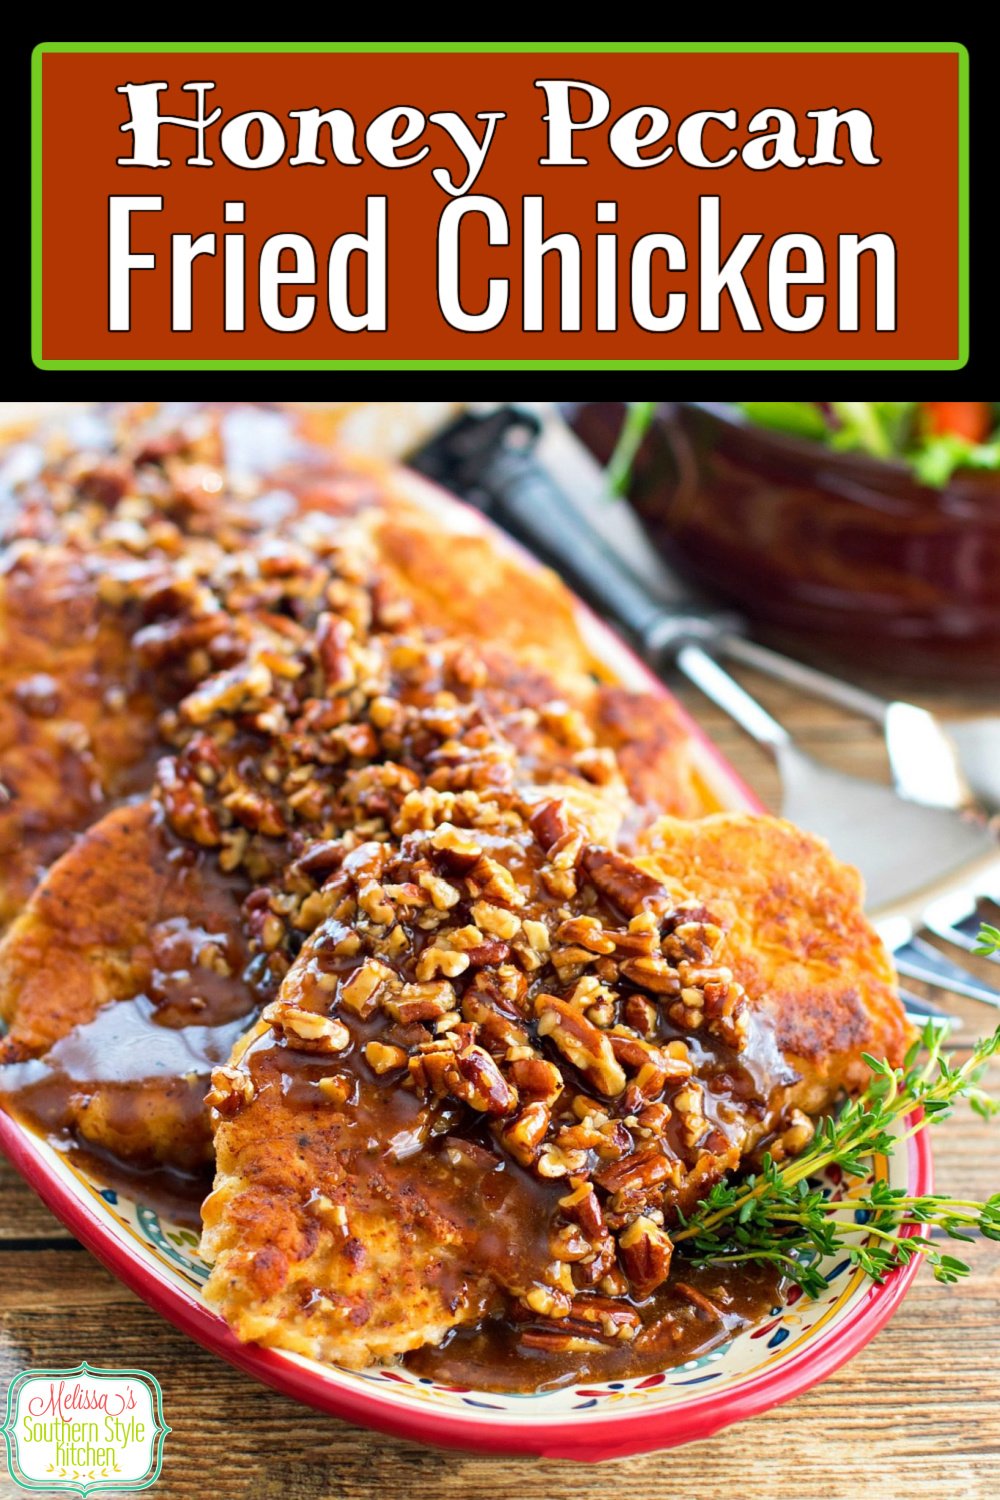 This decadent Honey Pecan Fried Chicken is drizzled with a homemade honey glaze that takes it over the top #easyfriedchicken #honeypecanchicken #easychickenrecipes #Southernfriedchicken #honeypecanglaze #dinner #dinnerideas #chickenbreastrecipes #southernfood #southernrecipes via @melissasssk